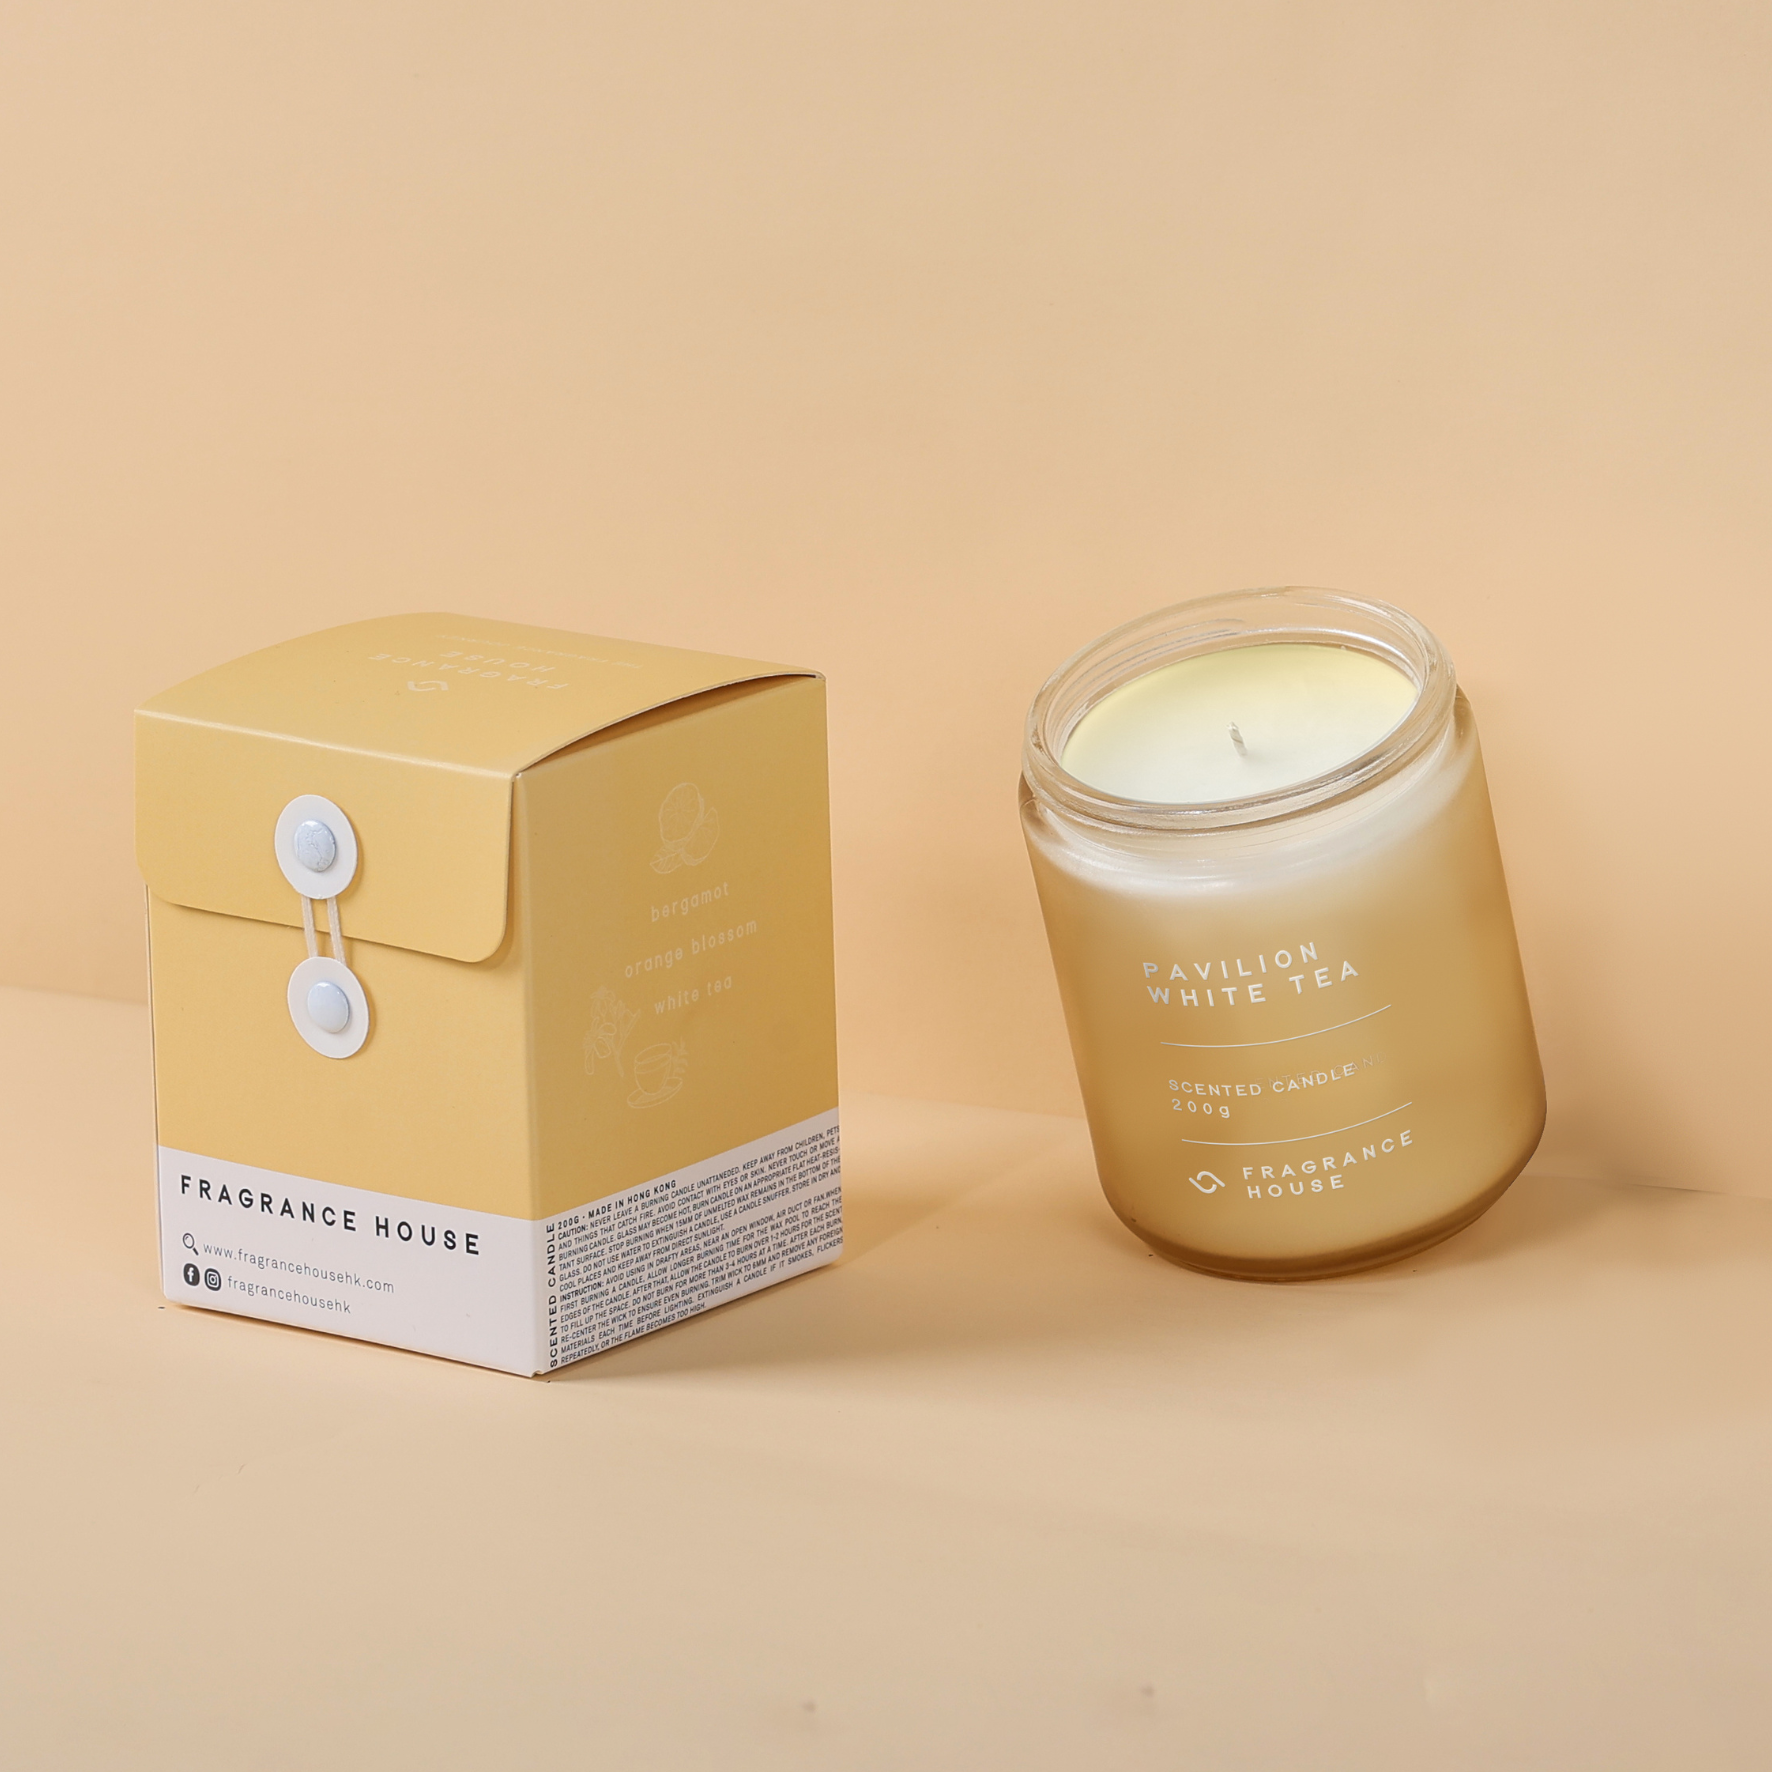 Pavilion White Tea scented poured candle with packing 亭下白茶香薰蠟燭連包裝